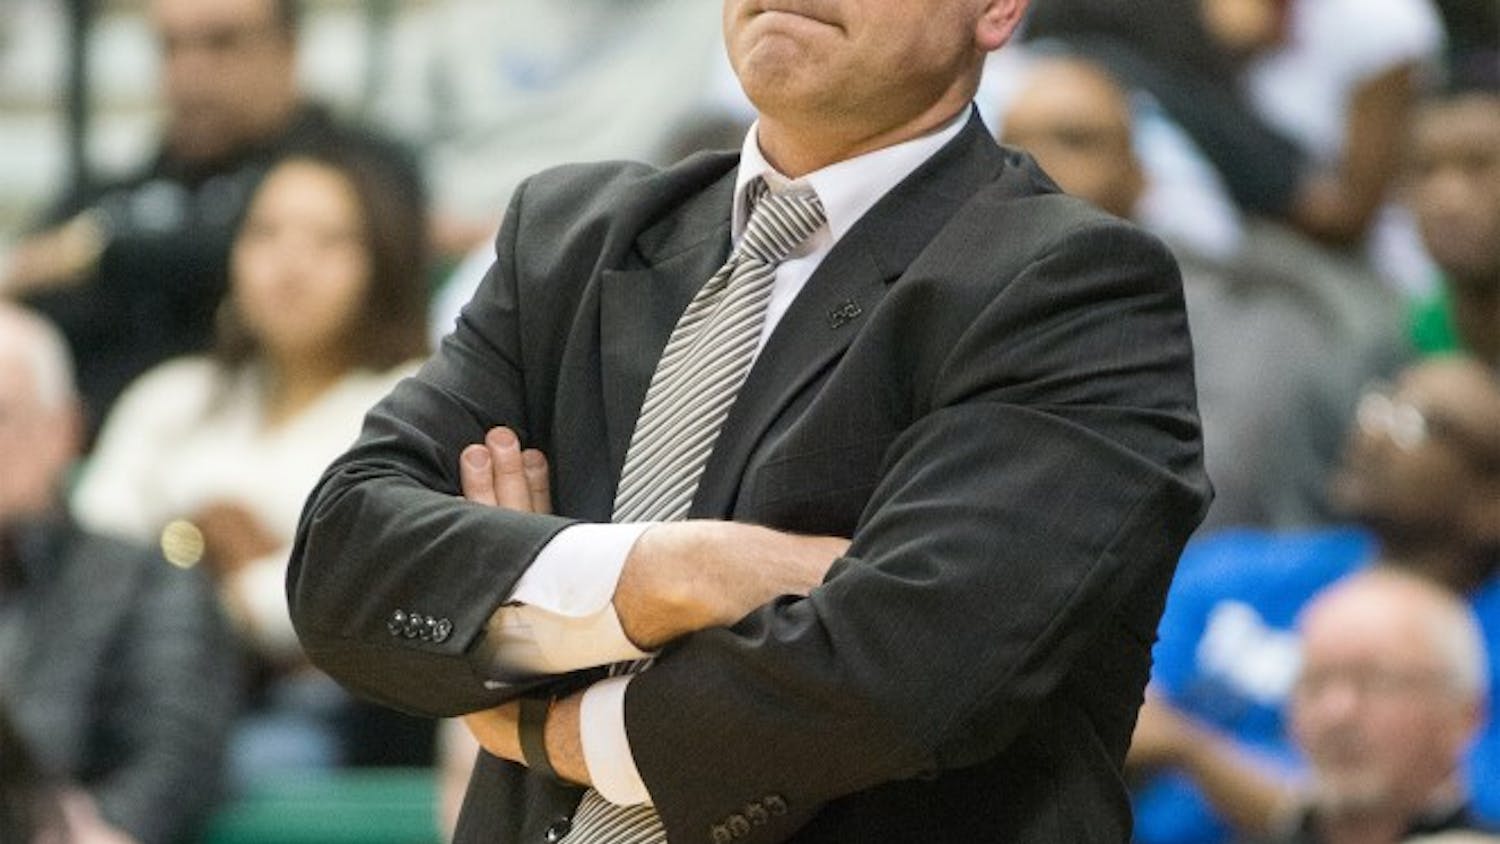 Eastern Michigan head coach Tory Verdi doesn't look happy about the poor first-half performance of the Eagles during their game against Central Michigan on 8 March at the Convocation Center.  The second half turned around, and EMU won 99-83 in an overtime thriller.